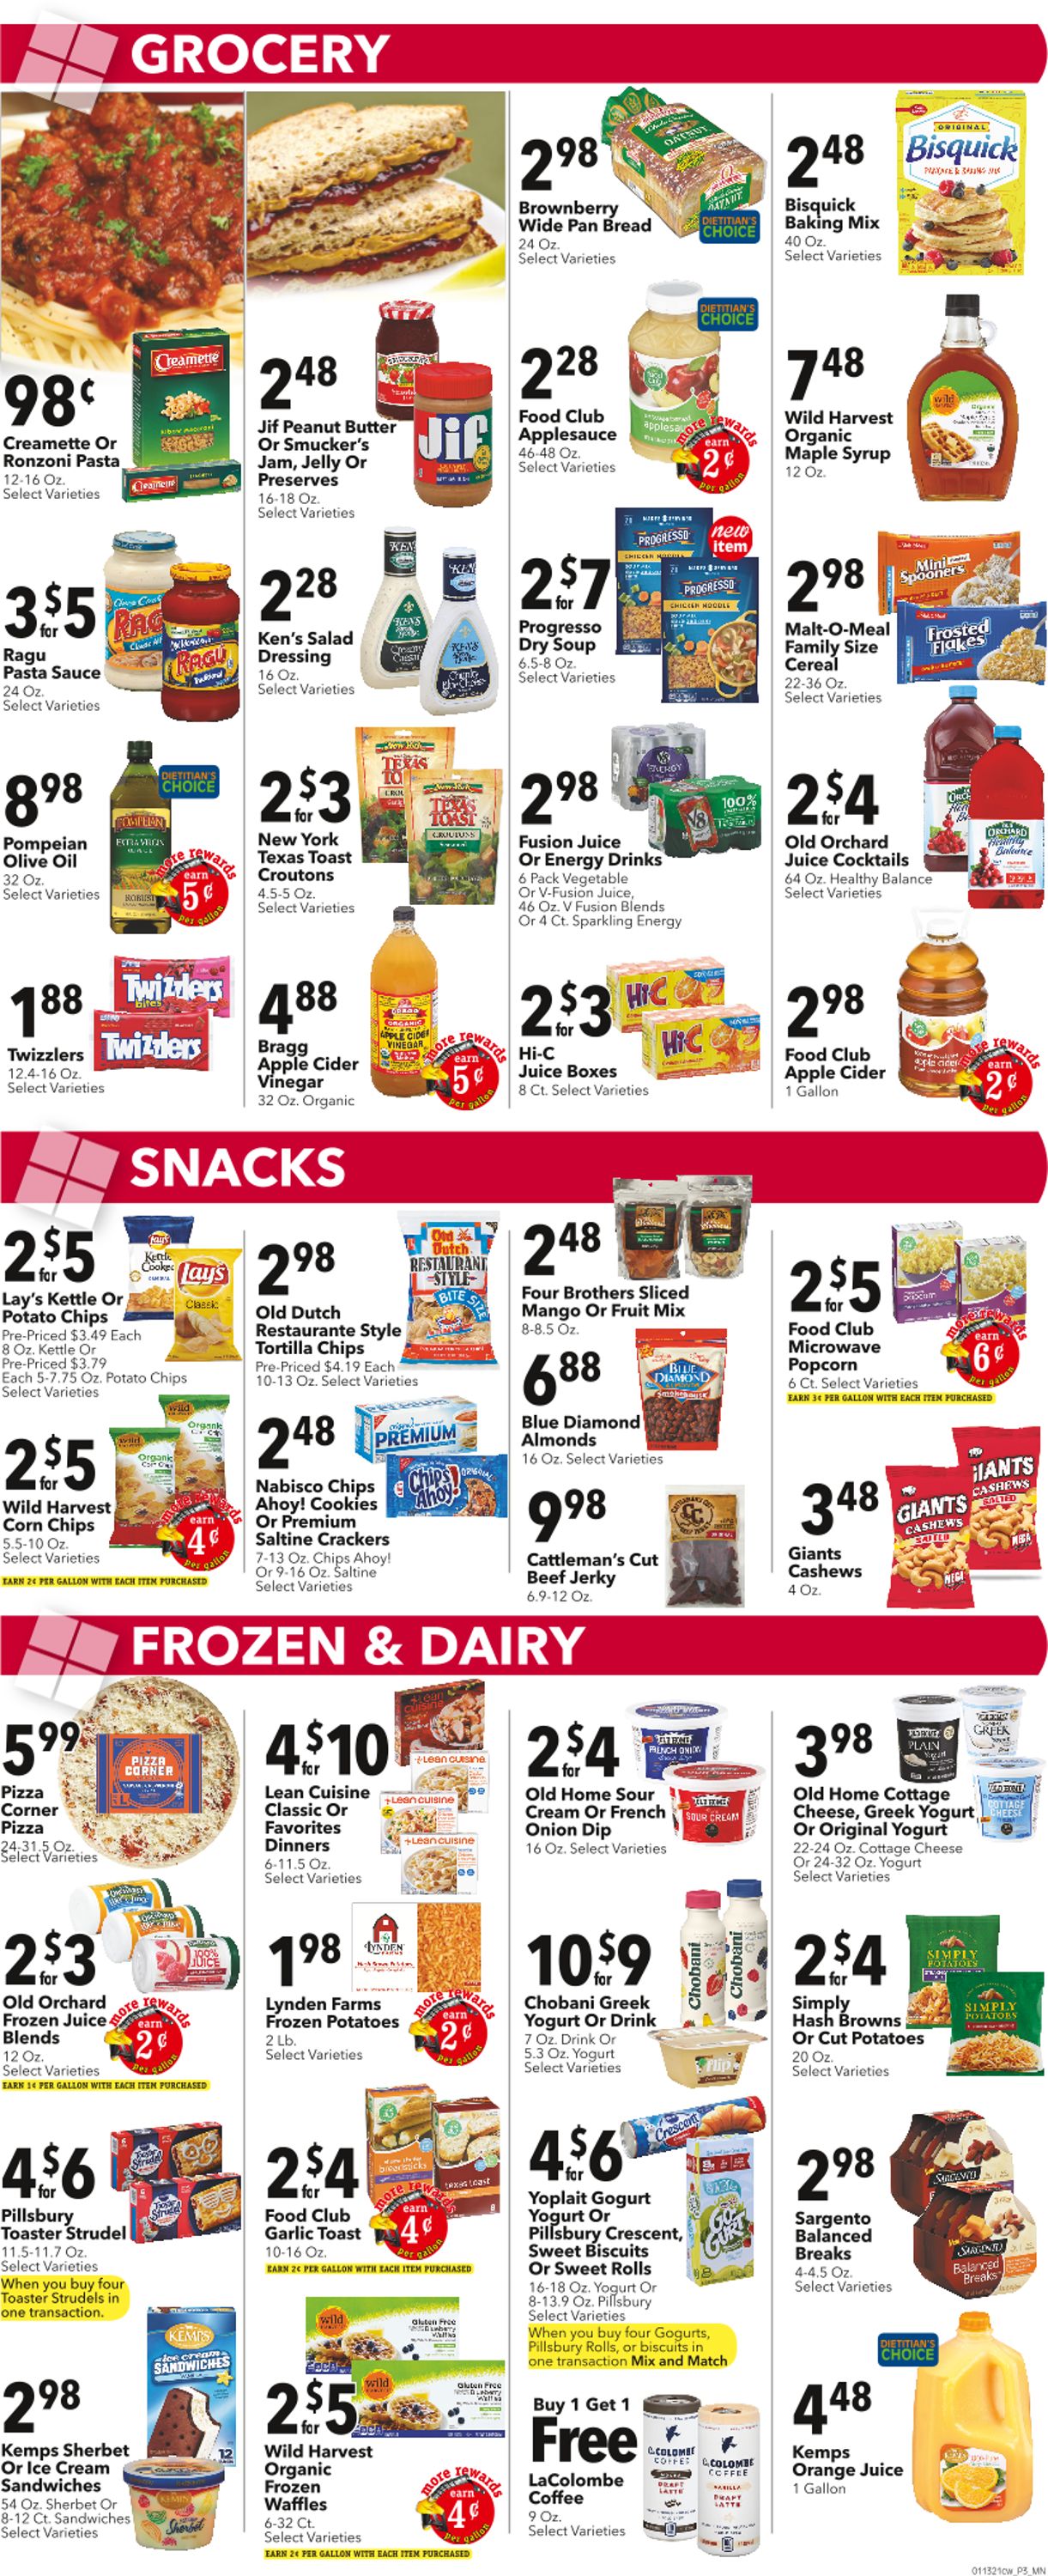 Cash Wise Weekly Ad Circular - valid 01/13-01/19/2021 (Page 3)